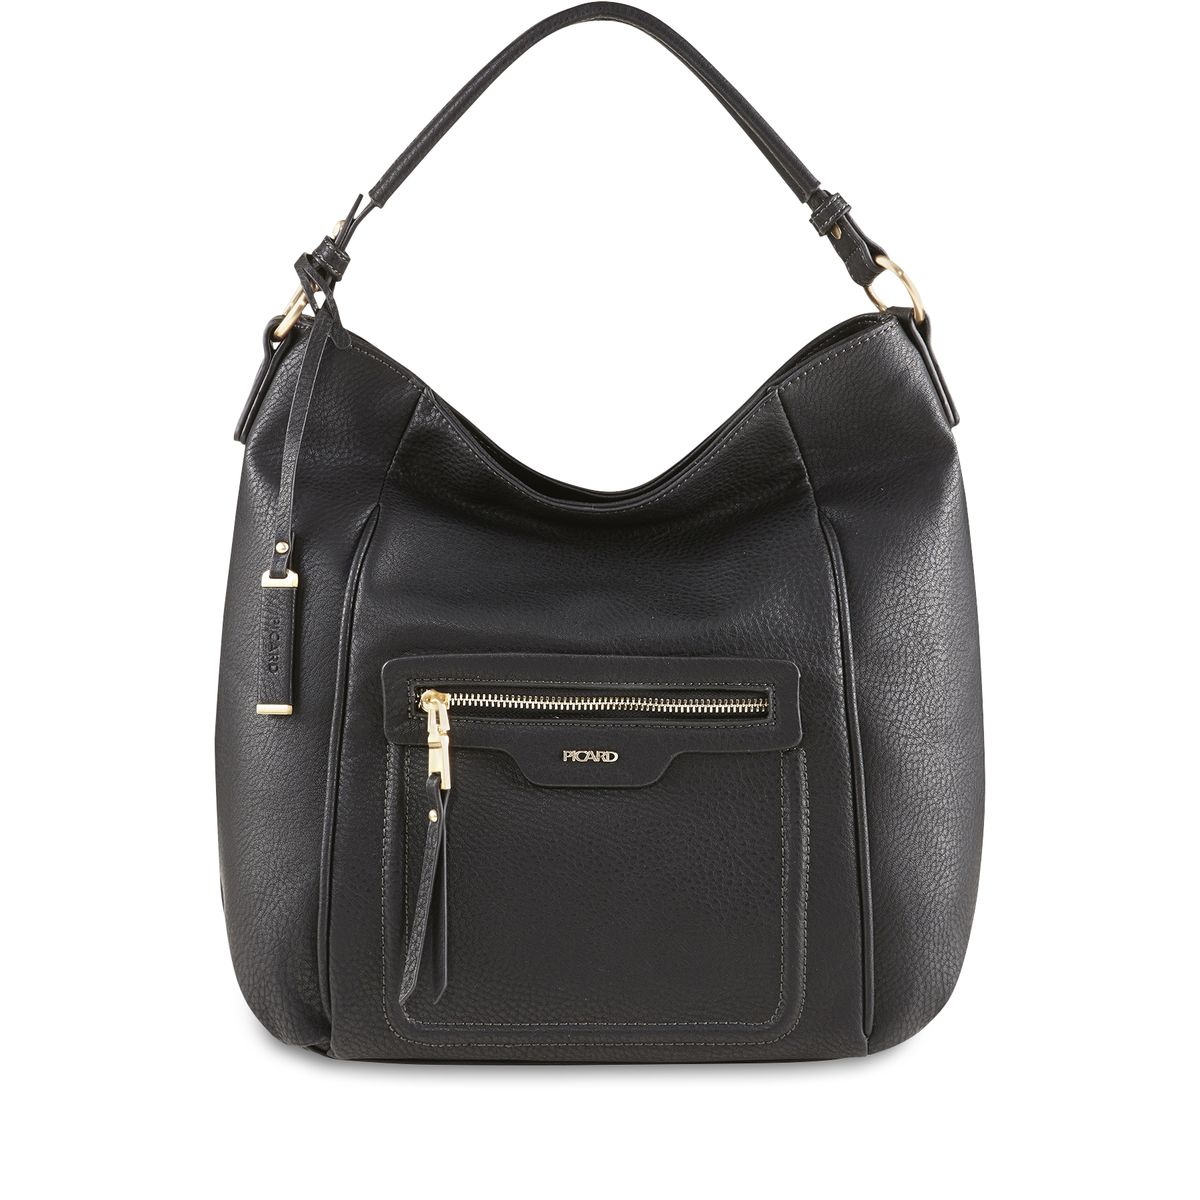 Picard Be Nice Pouch Handbag - Black | Buy Online in South Africa ...